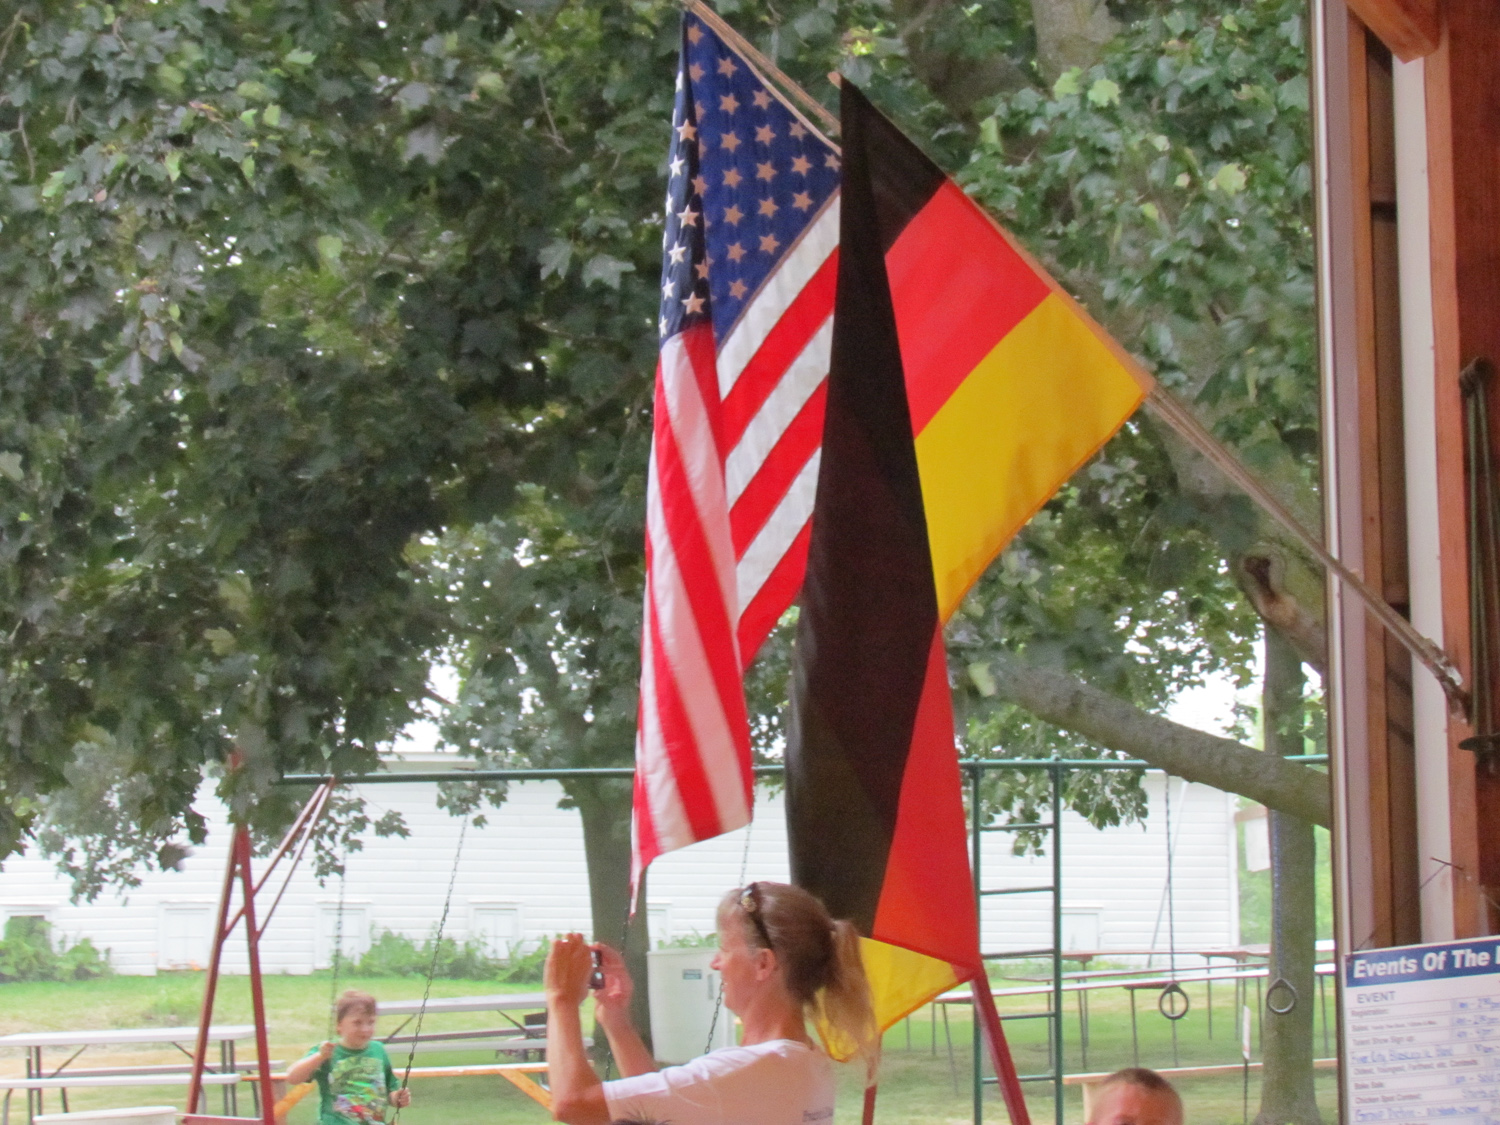 American and German Flags